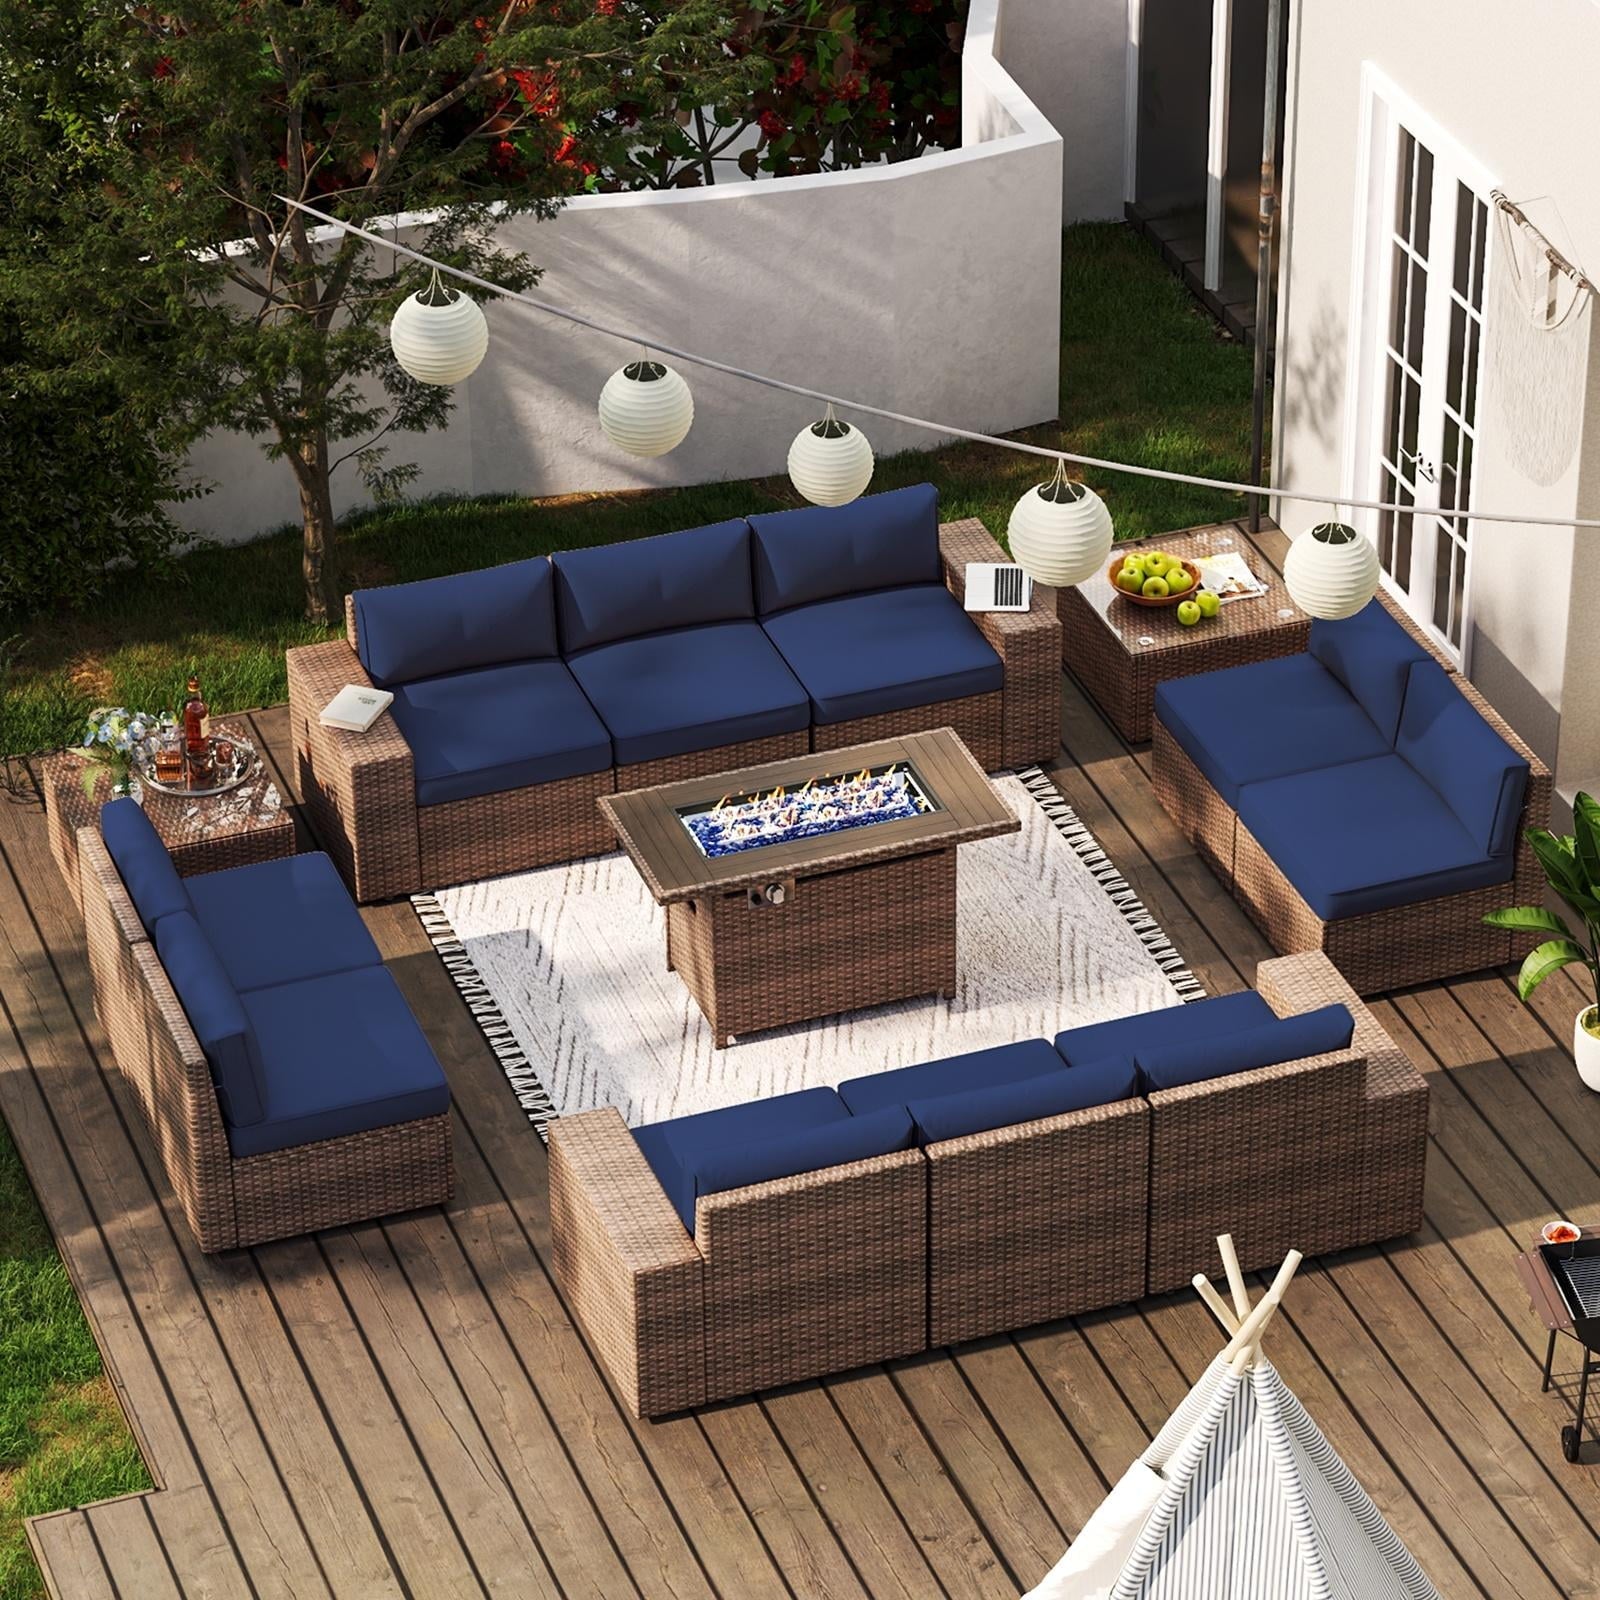 13pcs Patio Furniture Set with Fire Pit Table, PE Rattan Wicker sectional Sofa Set with 2 Coffee Table, Blue